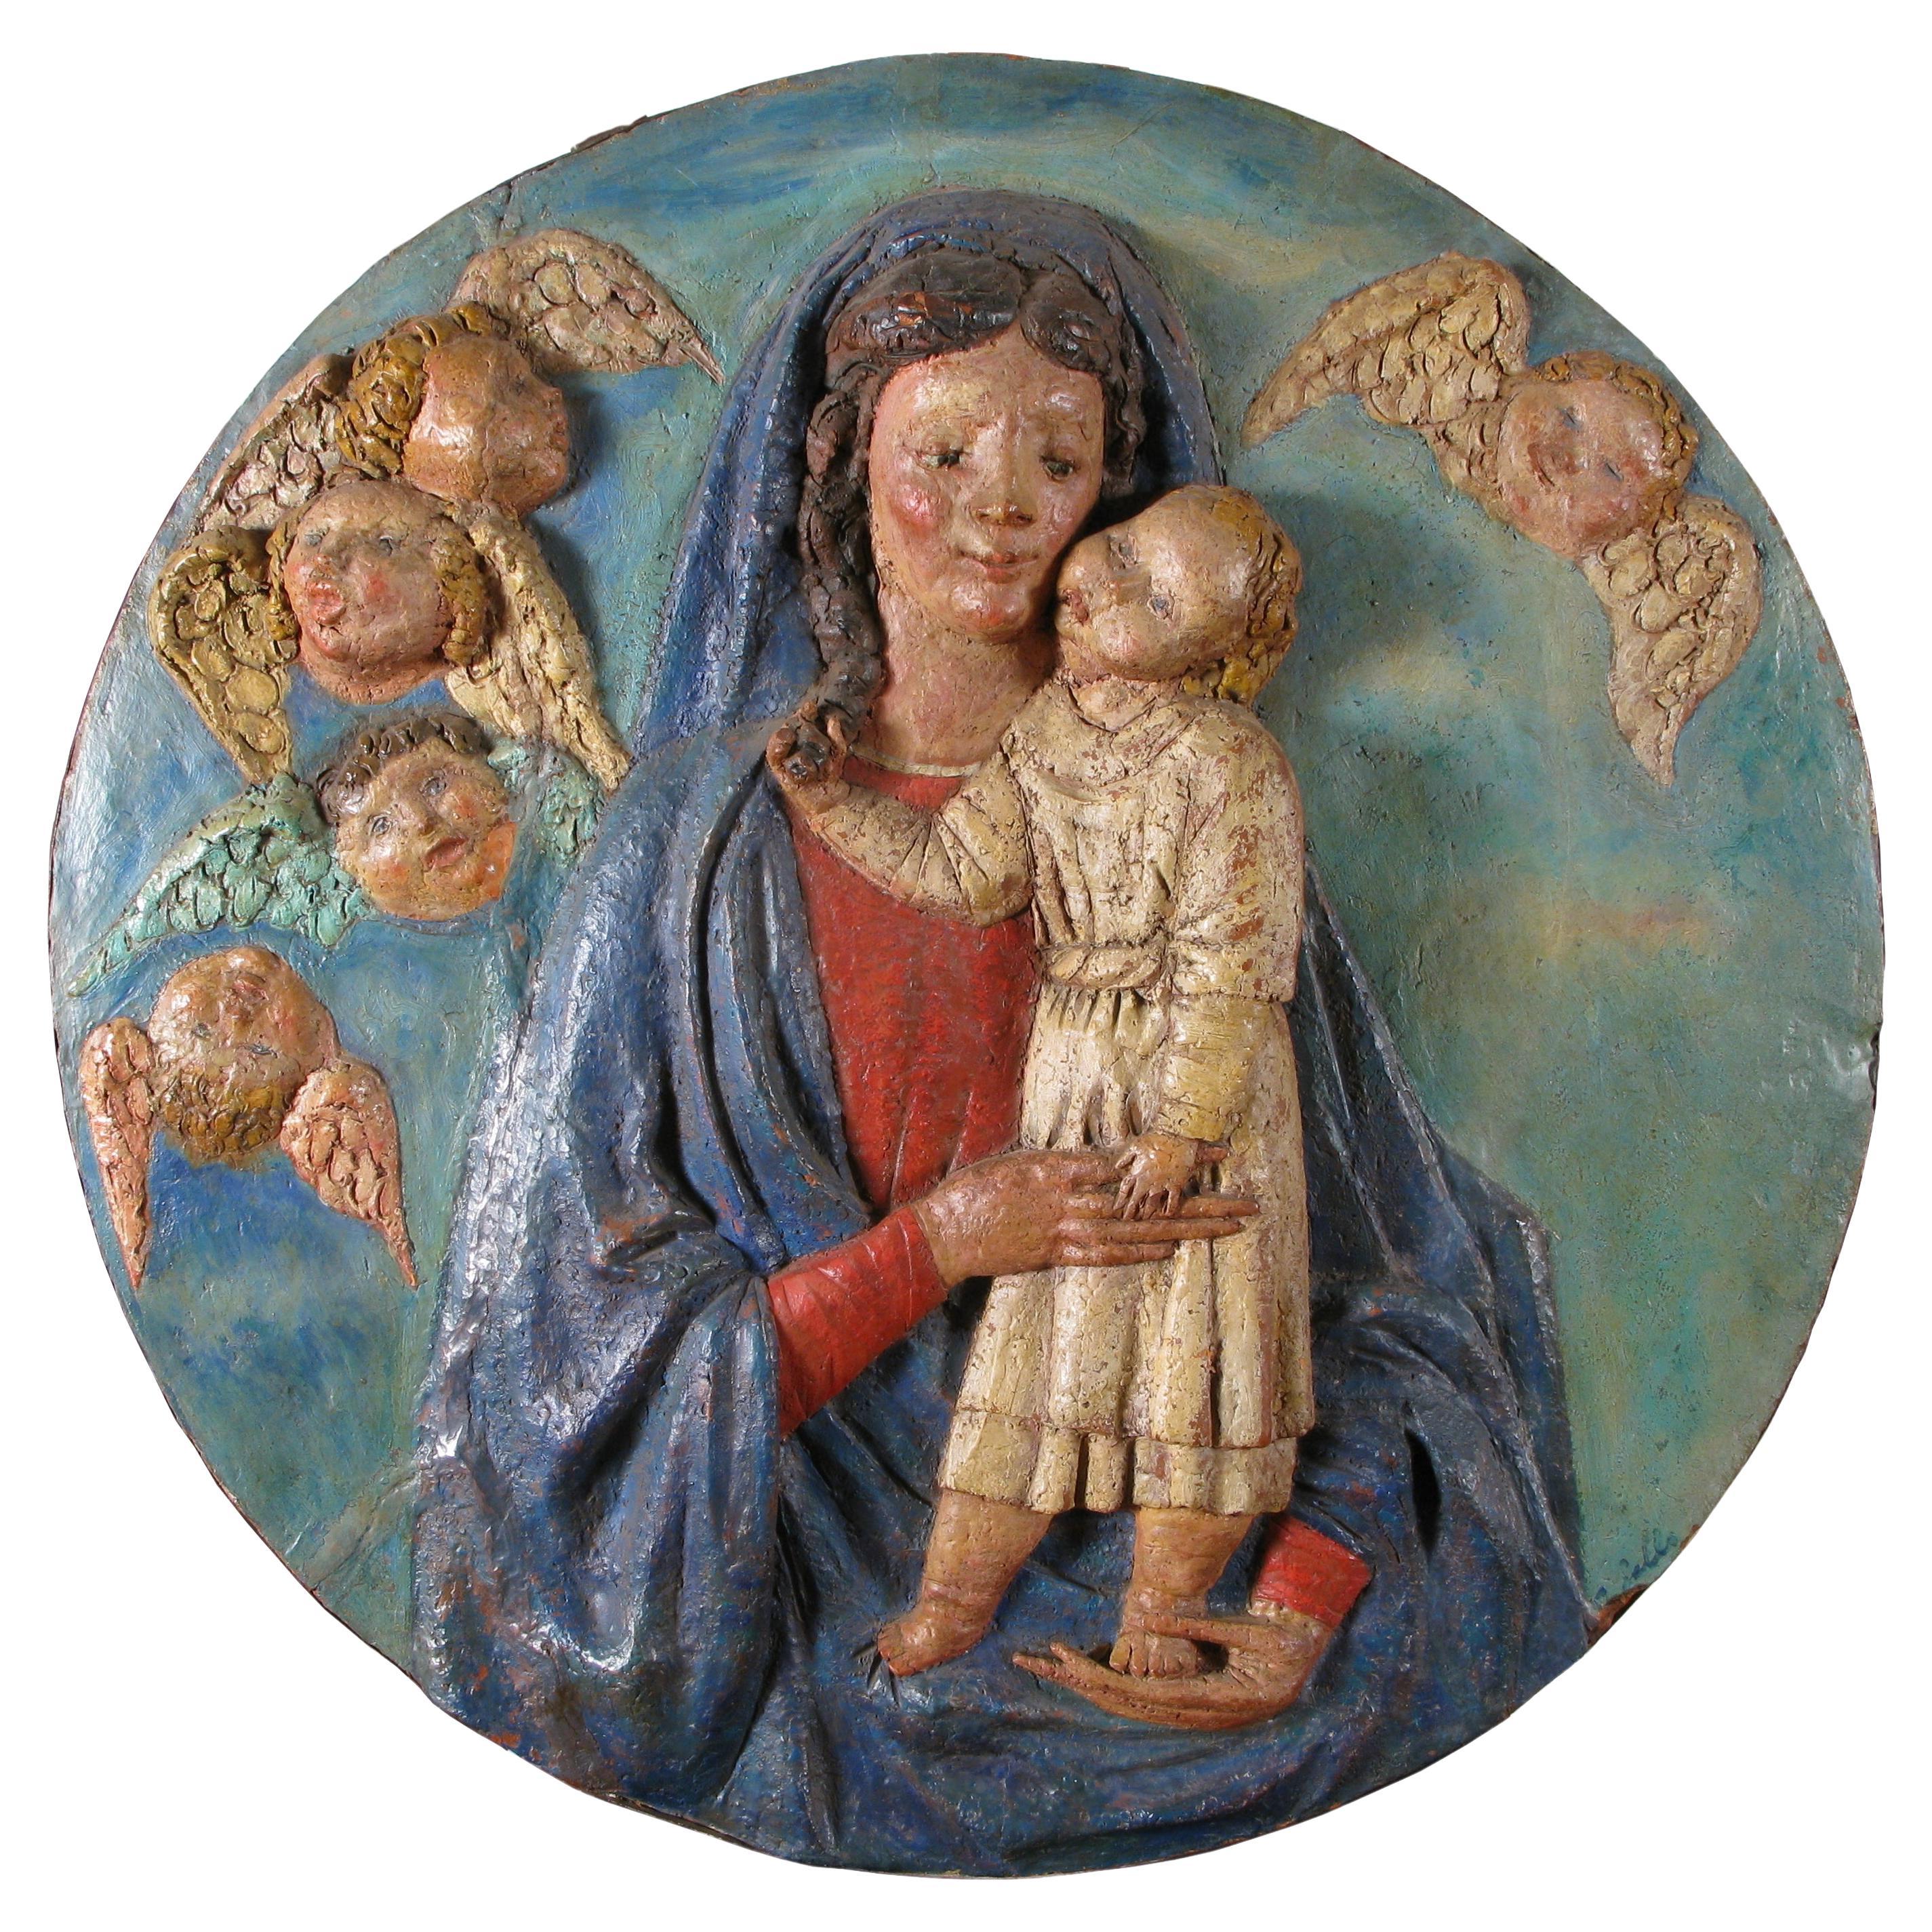 Madonna with Child, Tondo in Polychrome Terracotta from the 20th Century